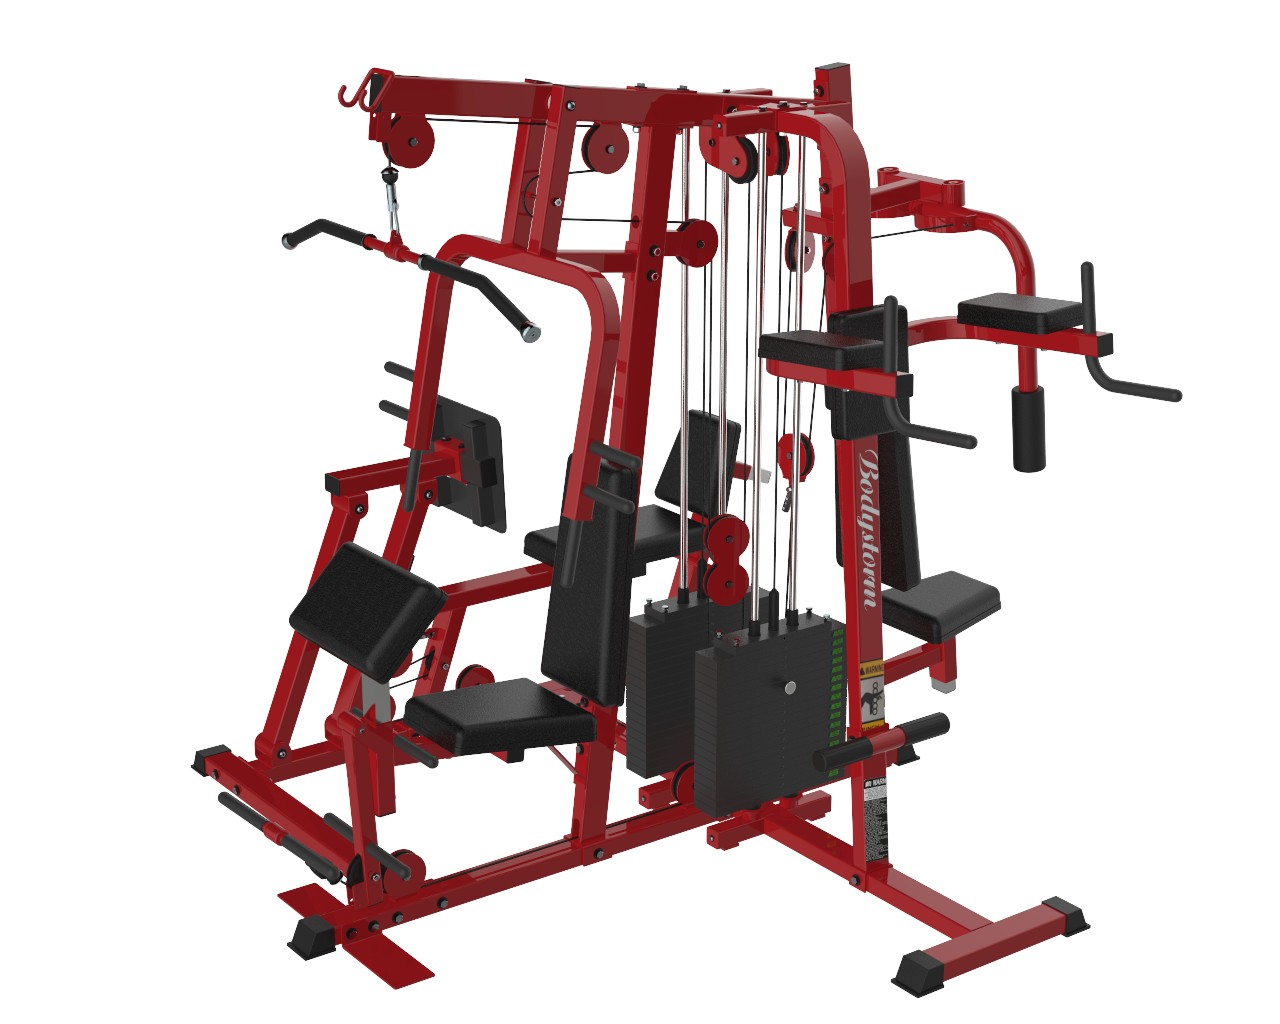 Five station  multi Function Station workout gym fitness equipment